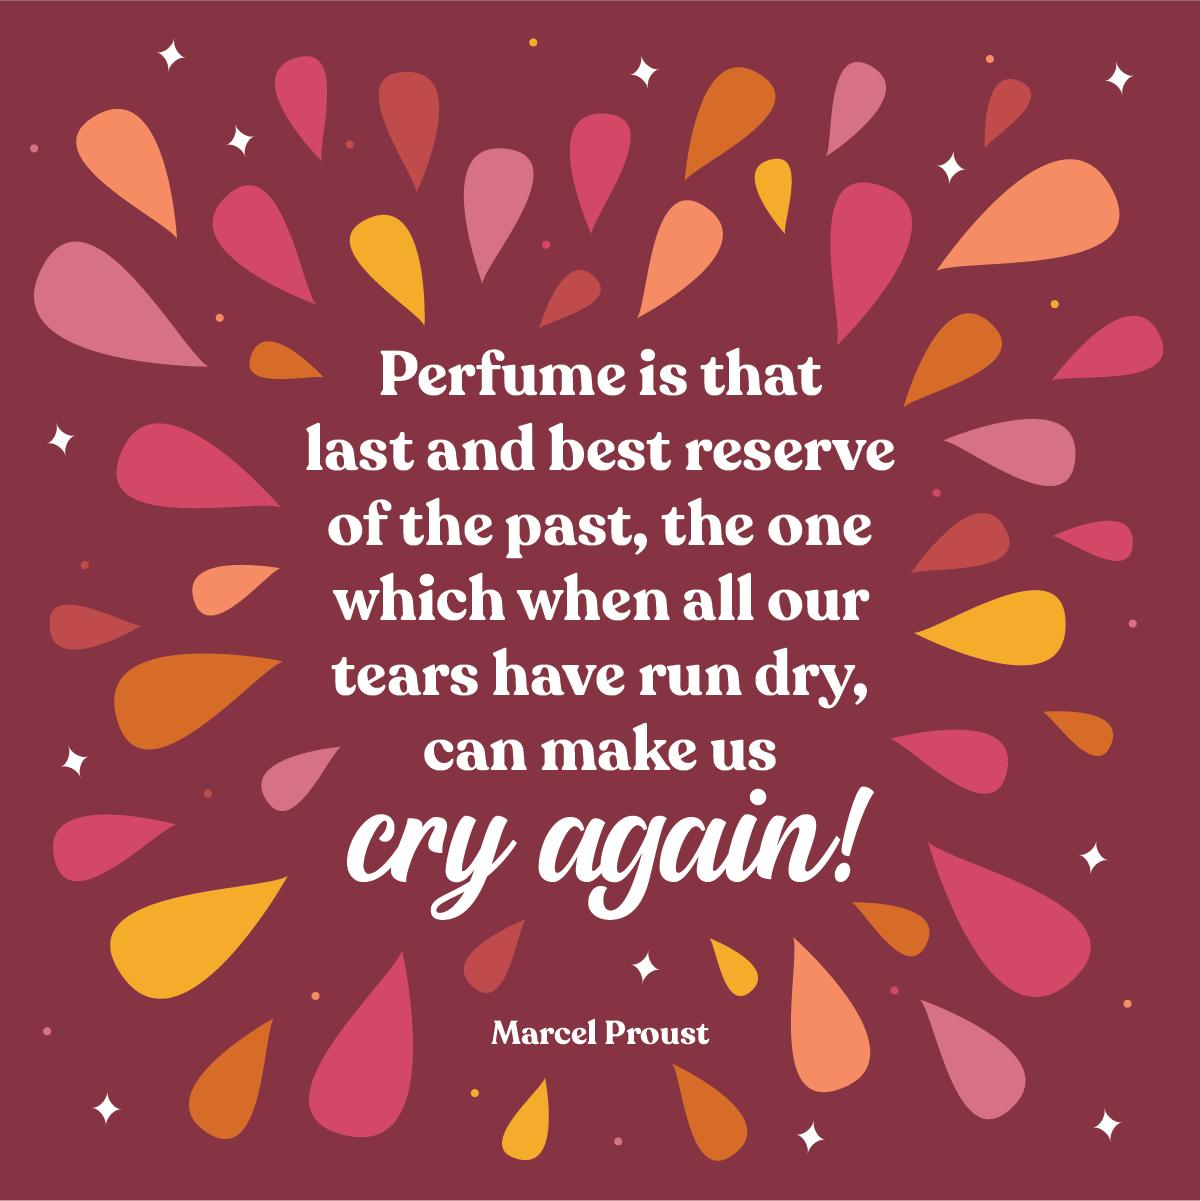 perfume-quotes_11-marcel-proust.png